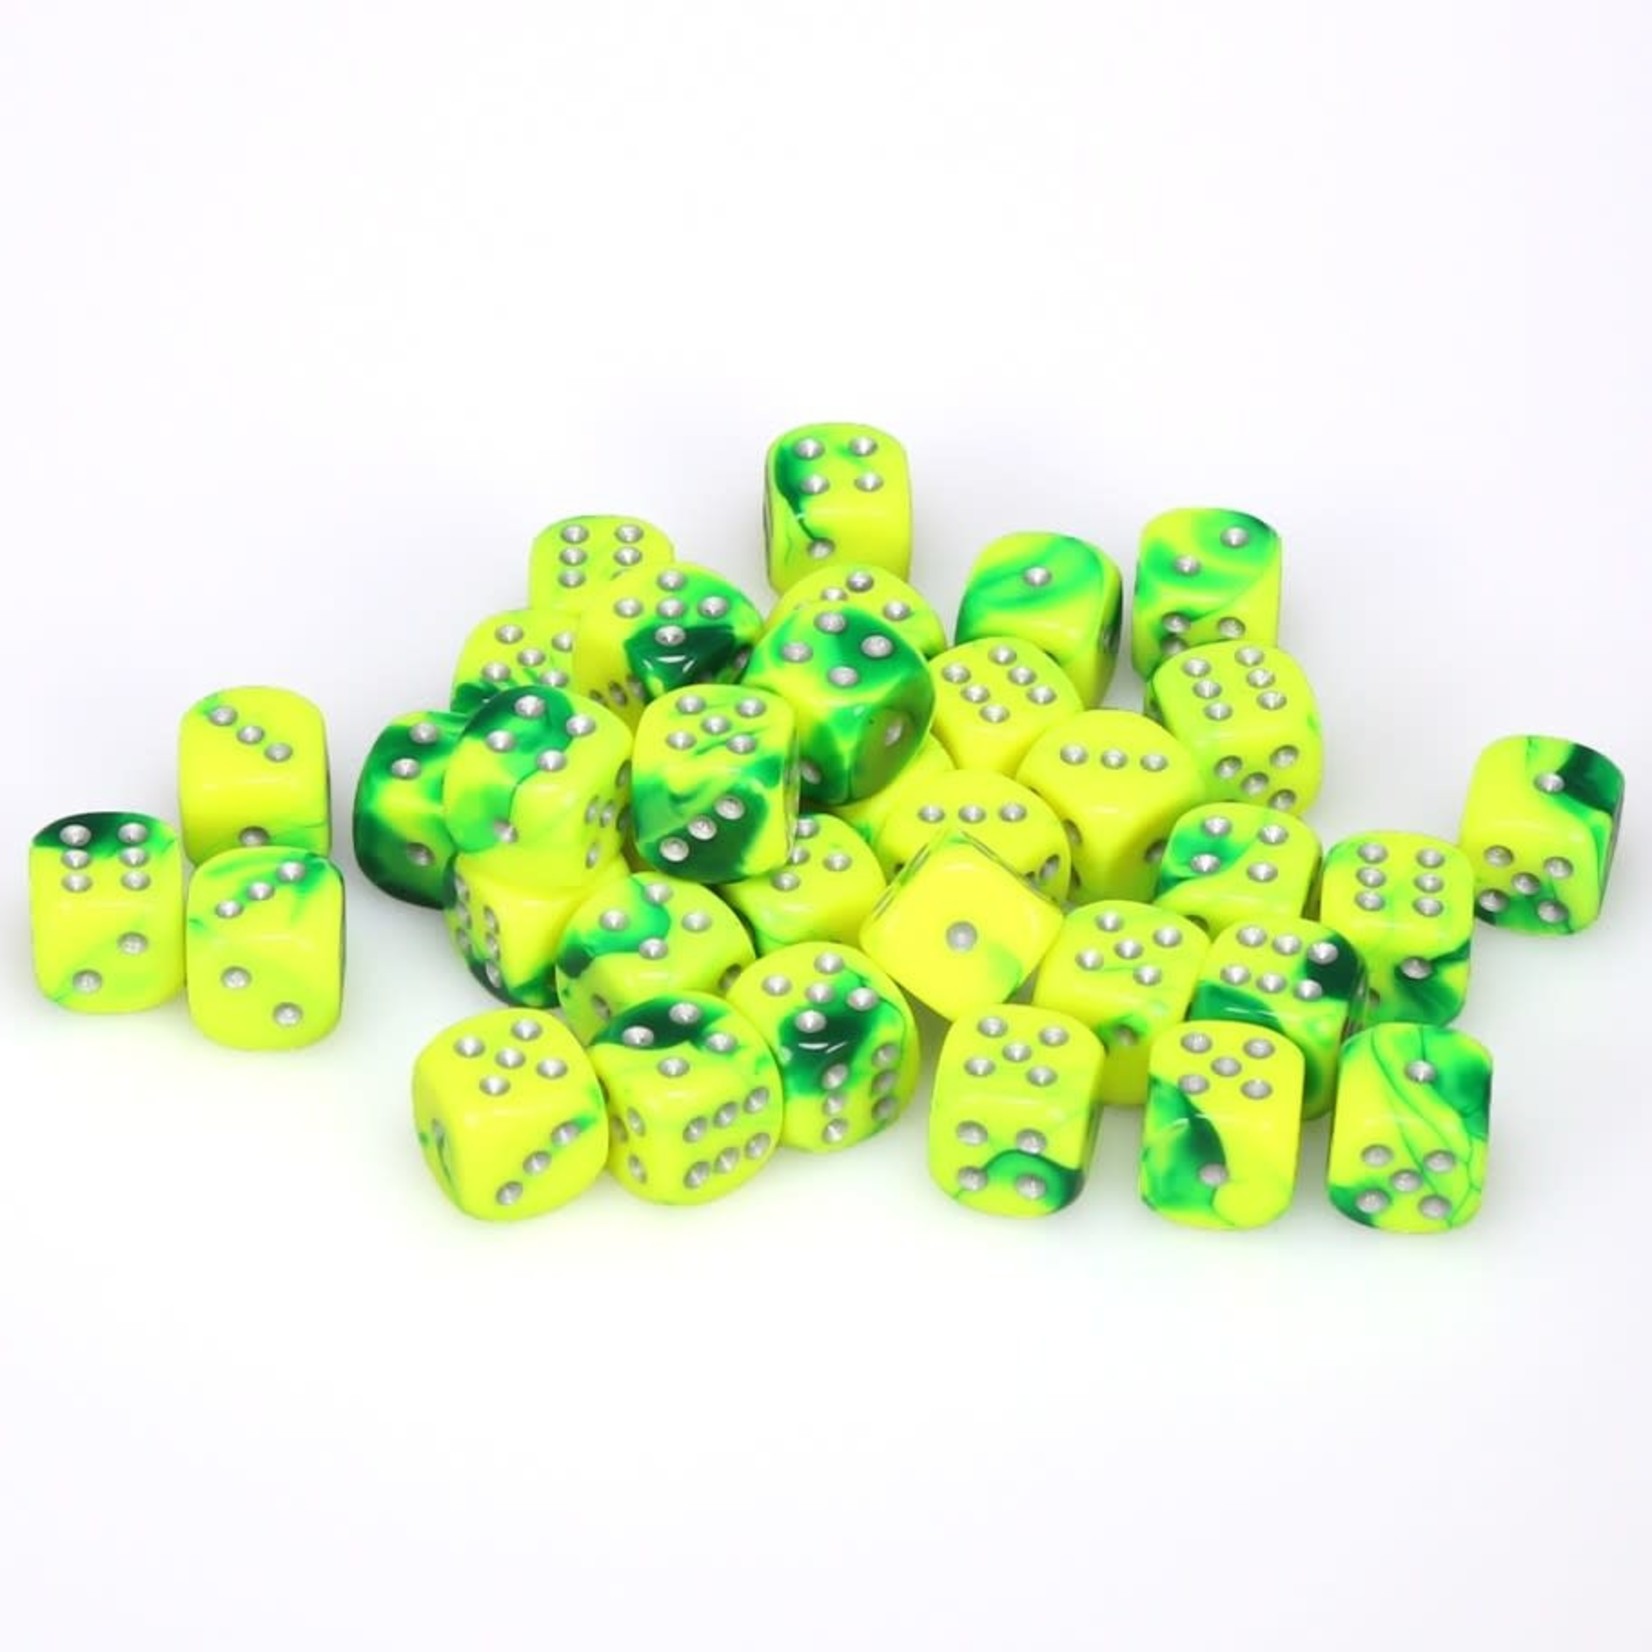 Chessex Chessex Gemini Green / Yellow with Silver 12 mm d6 36 die set